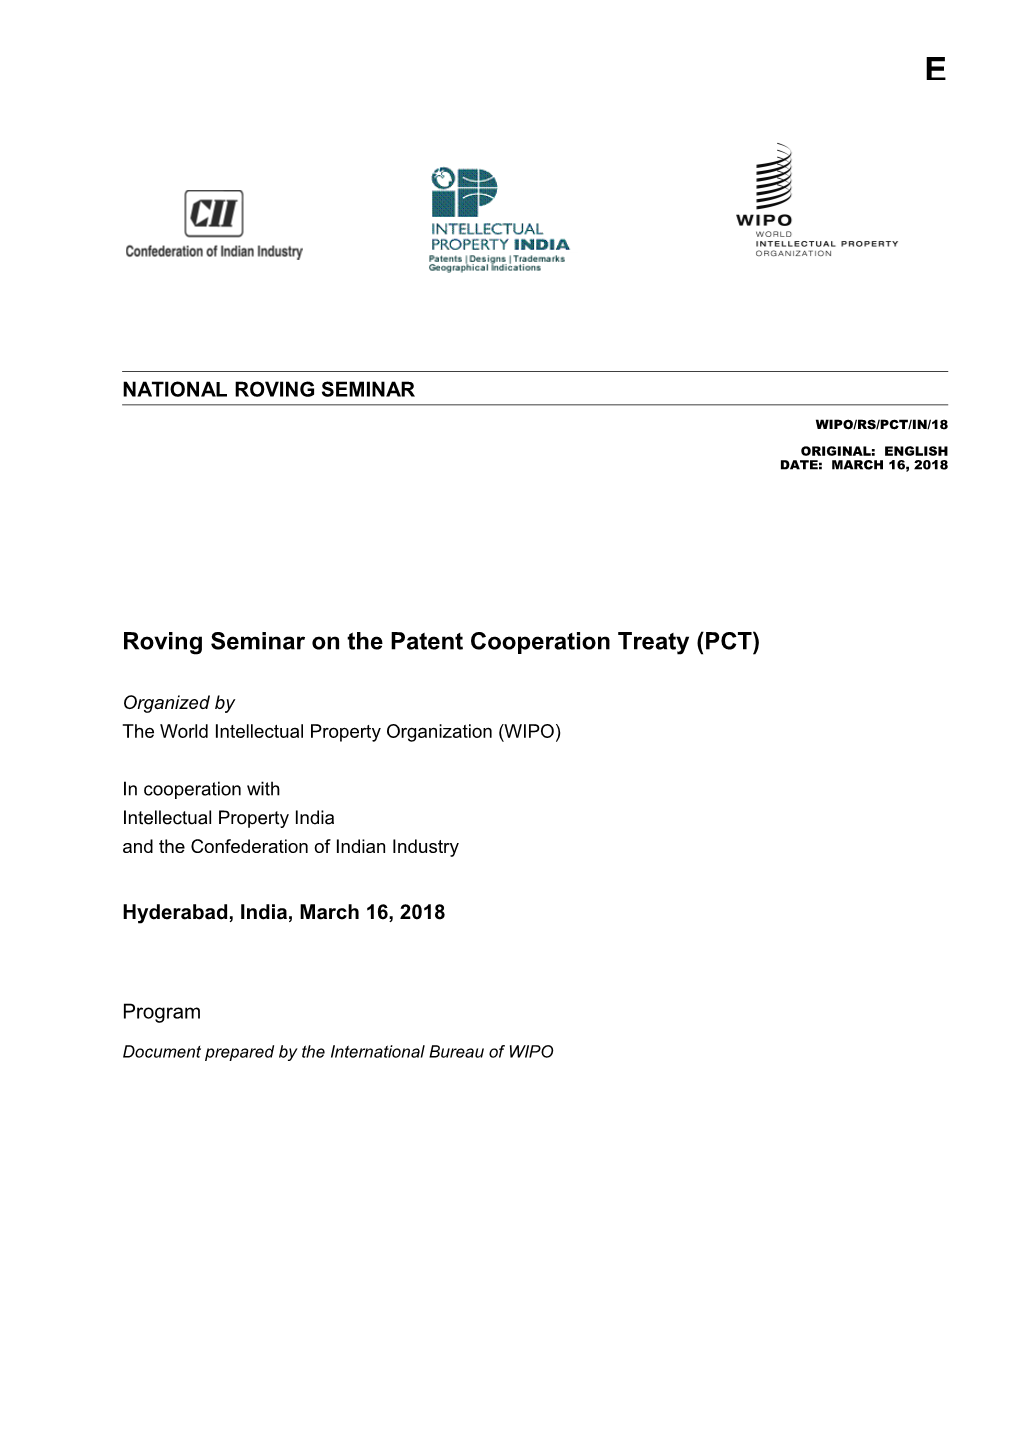 Roving Seminar on the Patent Cooperation Treaty (PCT)